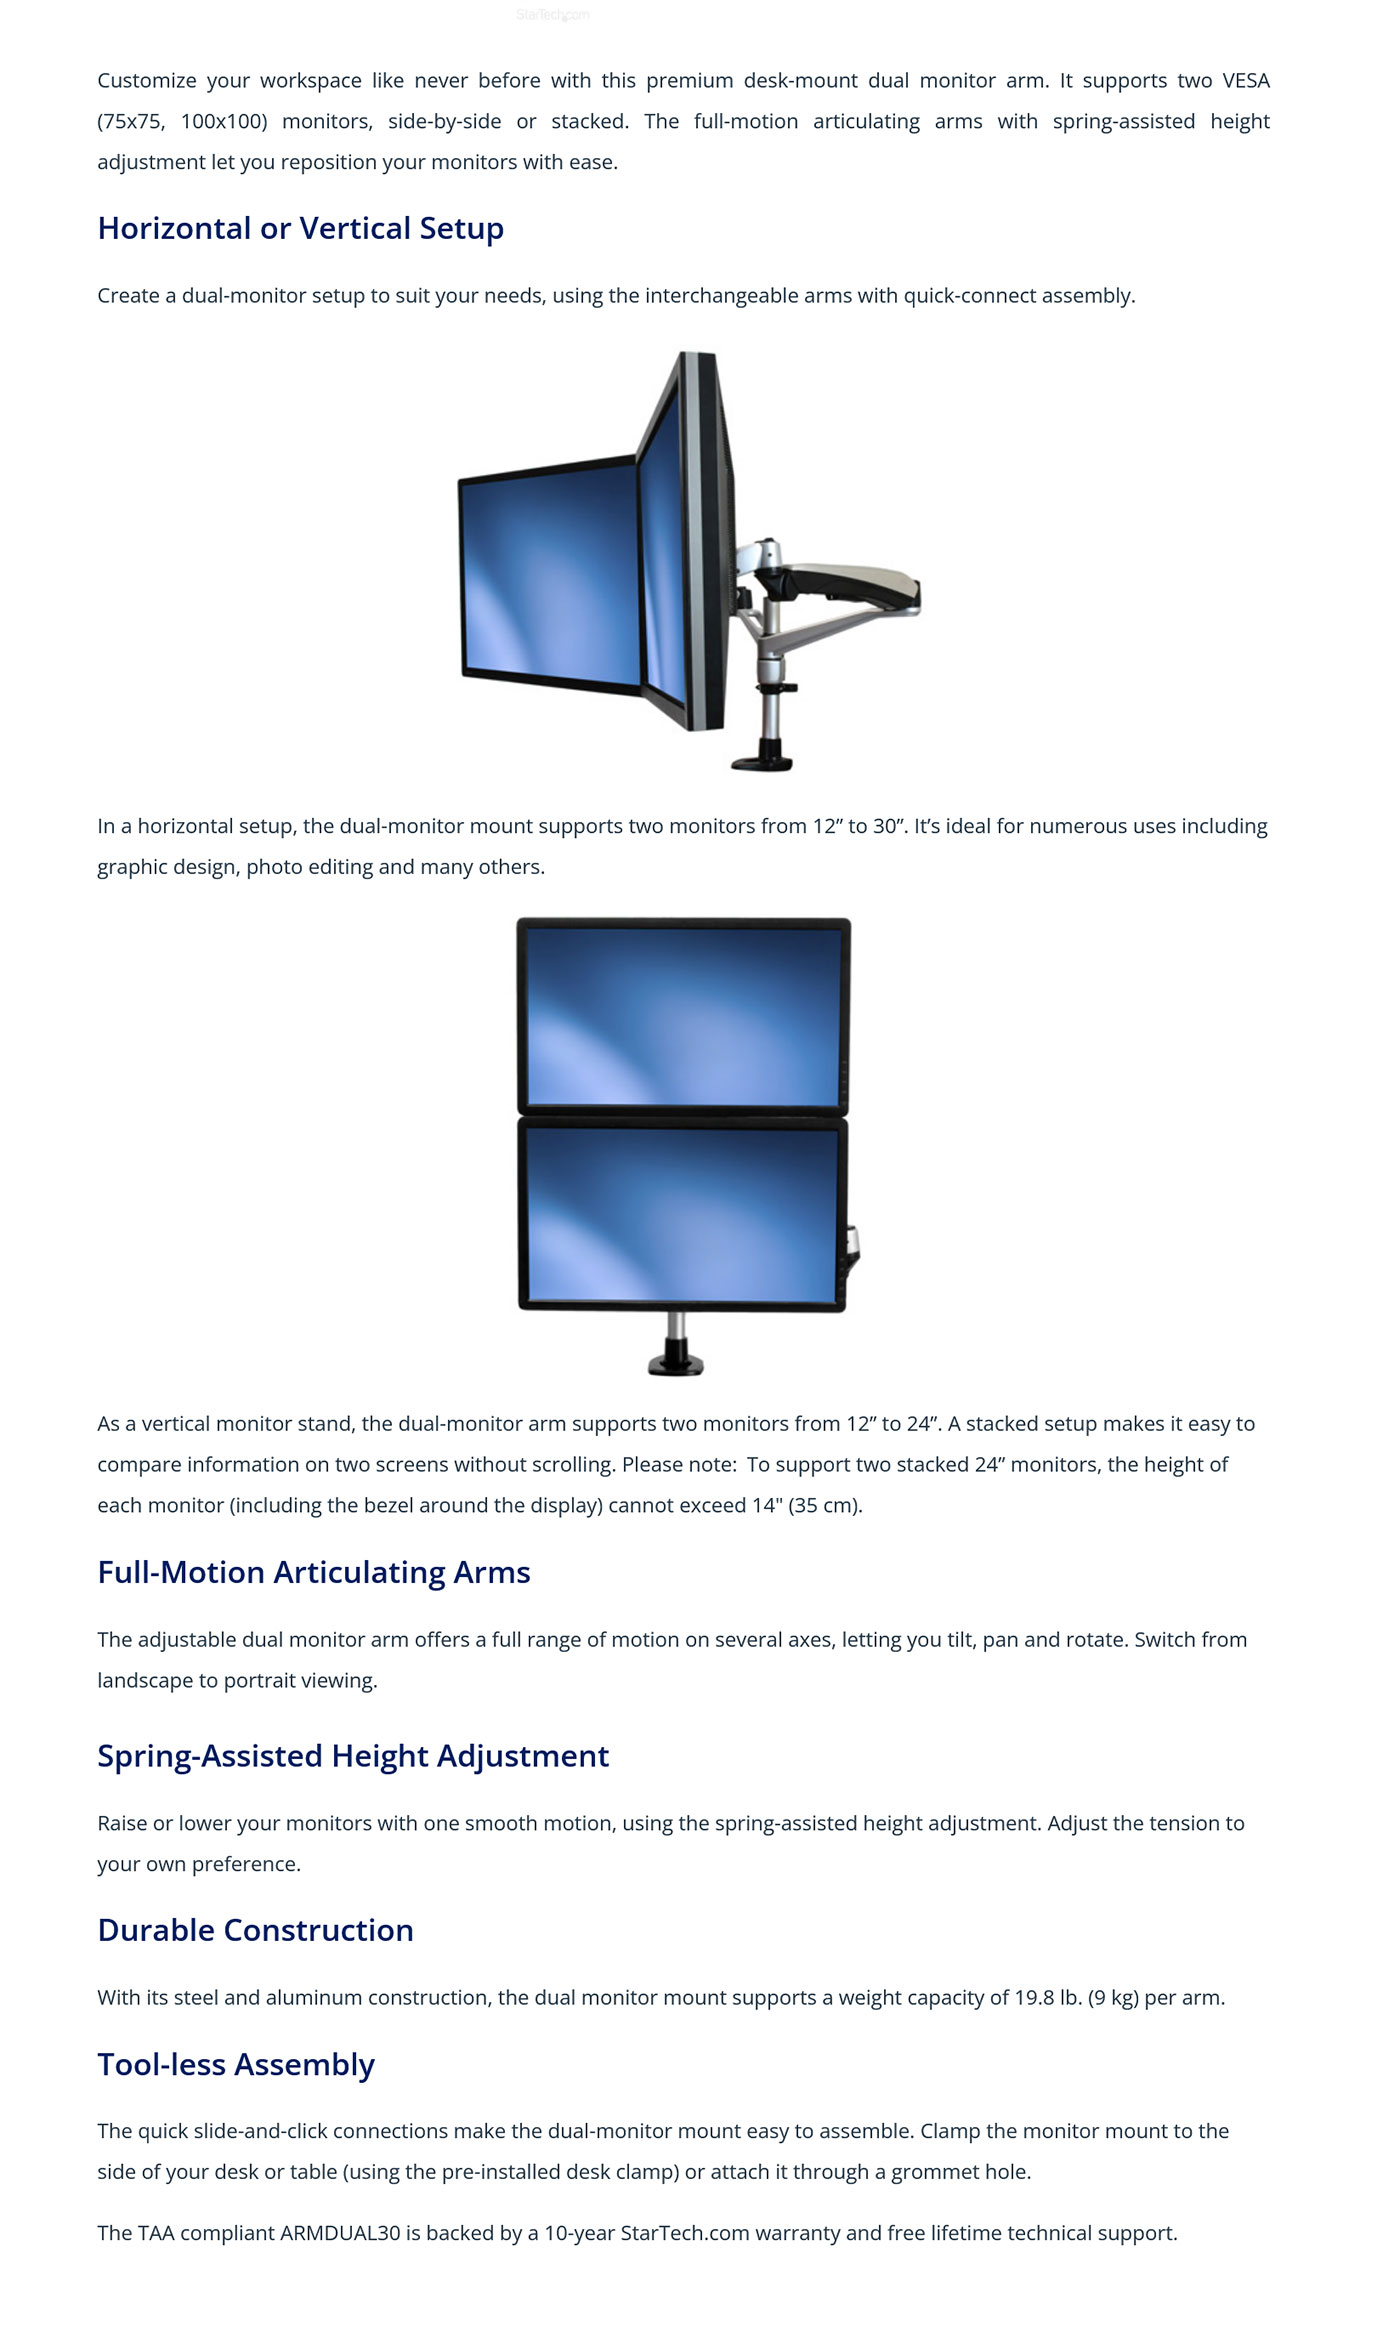 StarTech Dual Monitor Mount with Full-Motion Arms ARMDUAL30 Details